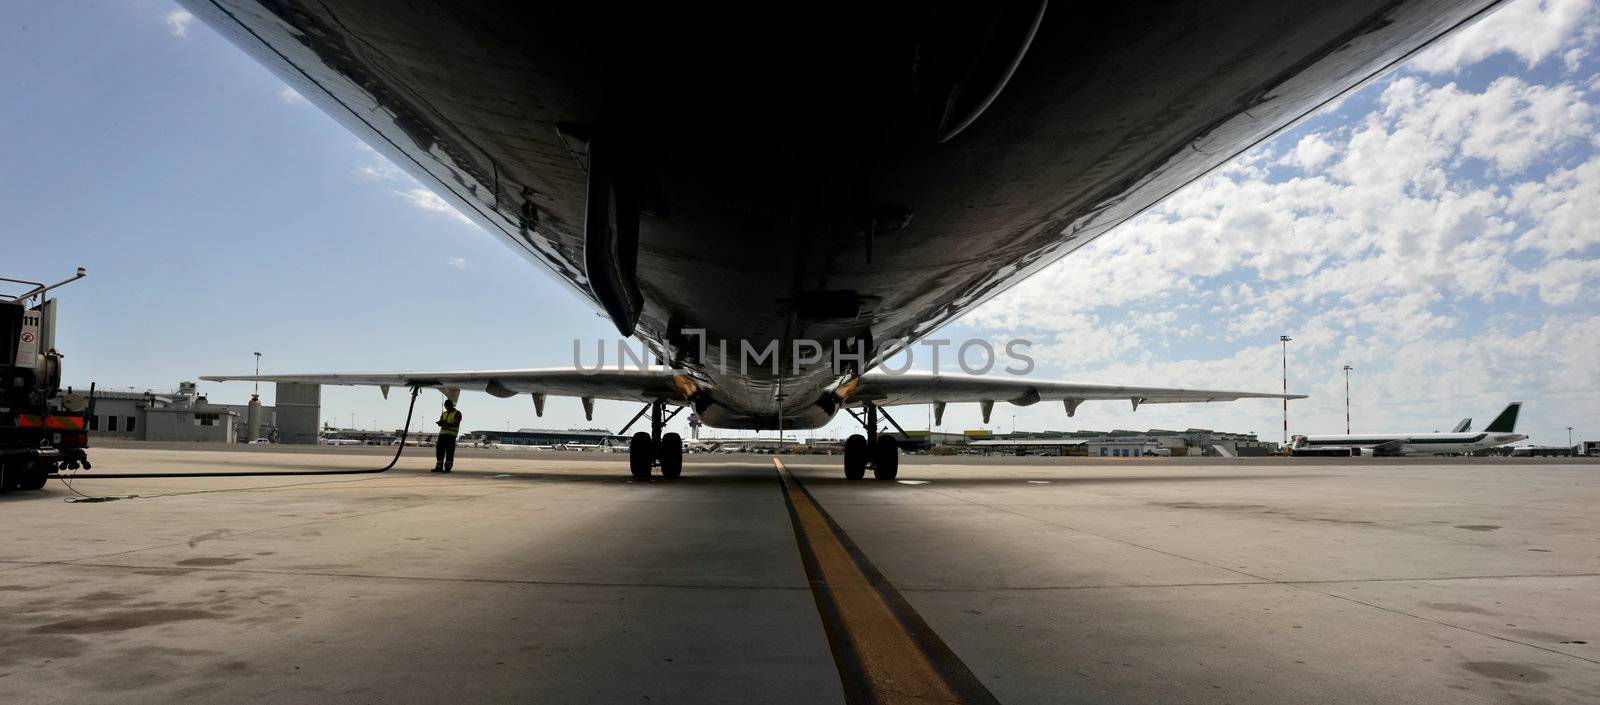 Under the plane by lillo